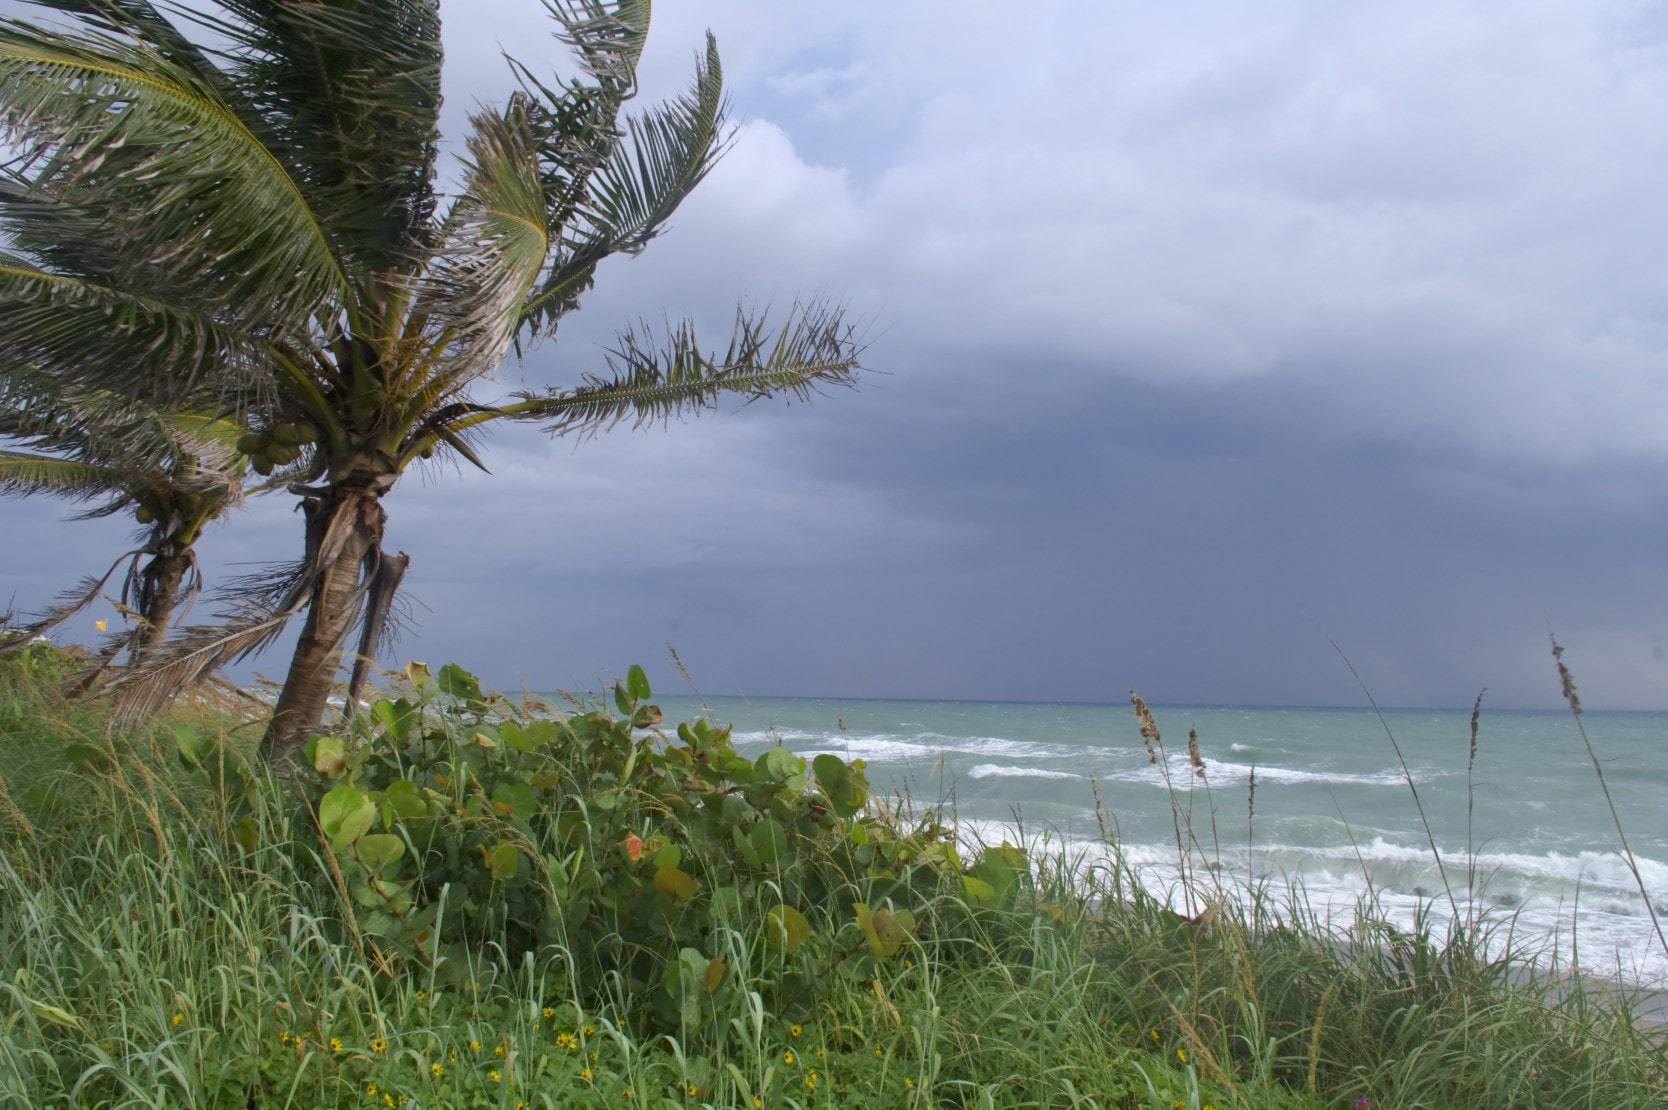 Dark clouds over the ocean and a windswept palm tree on a Florida coastline